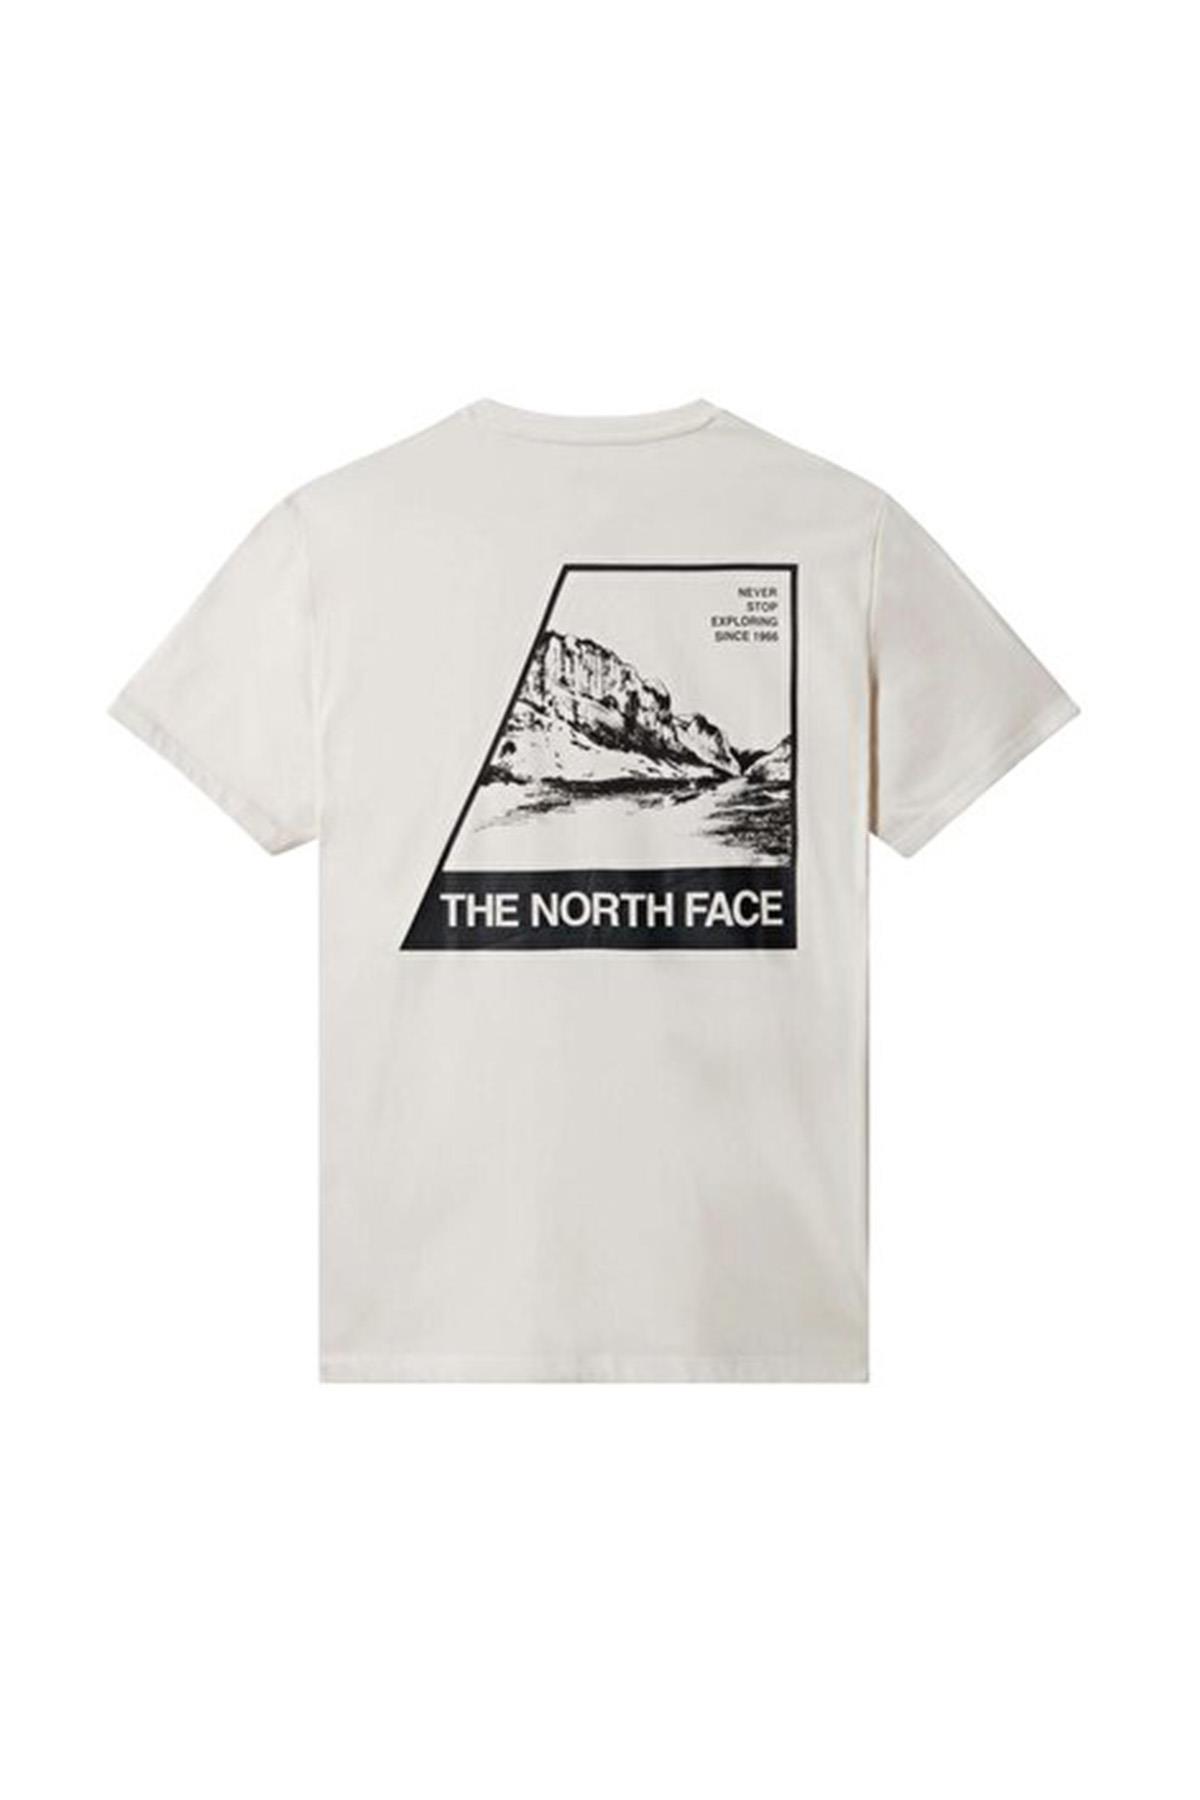  The North Face M FOUNDATION GRAPHIC TEE S/S - EU T-Shirt  NF0A55EFN3N1